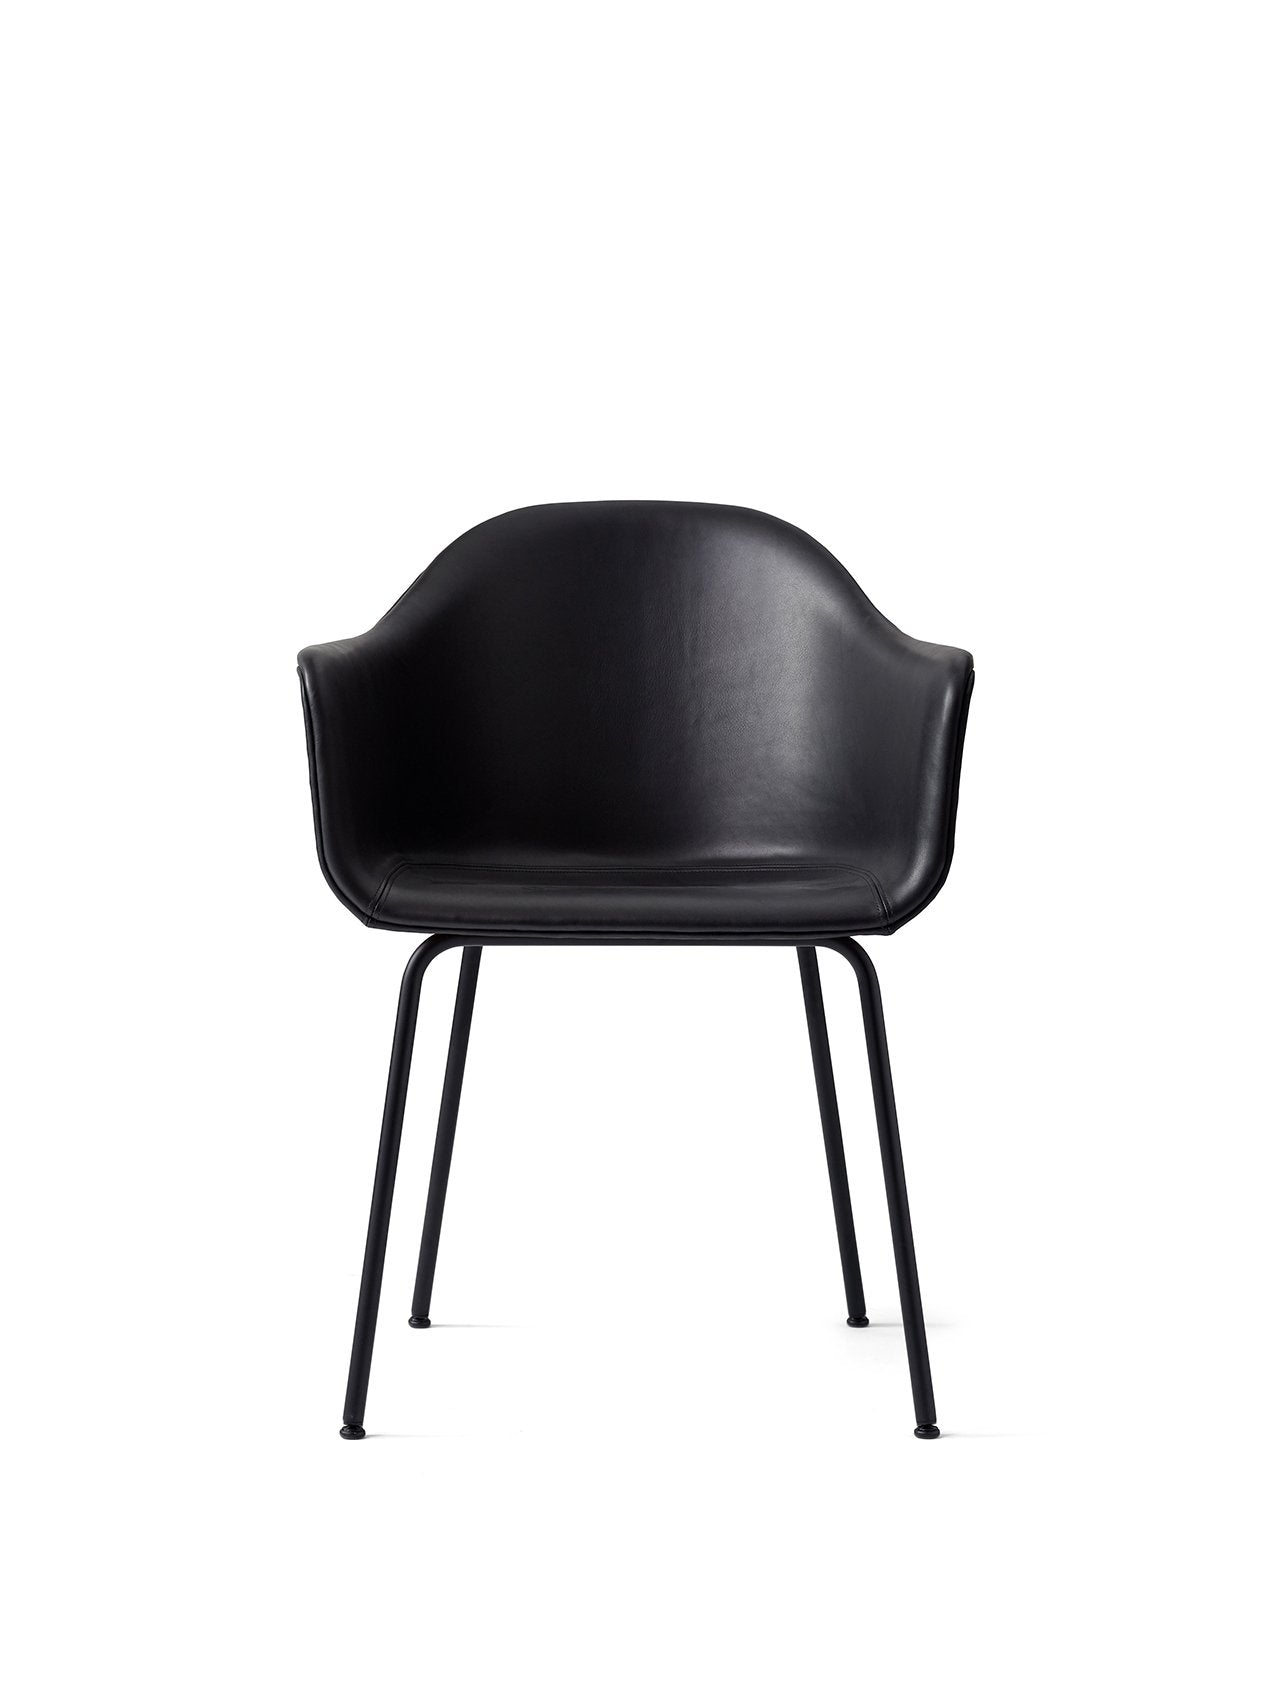 Harbour Arm Chair, Dining Height, Black Steel Base, Upholstered